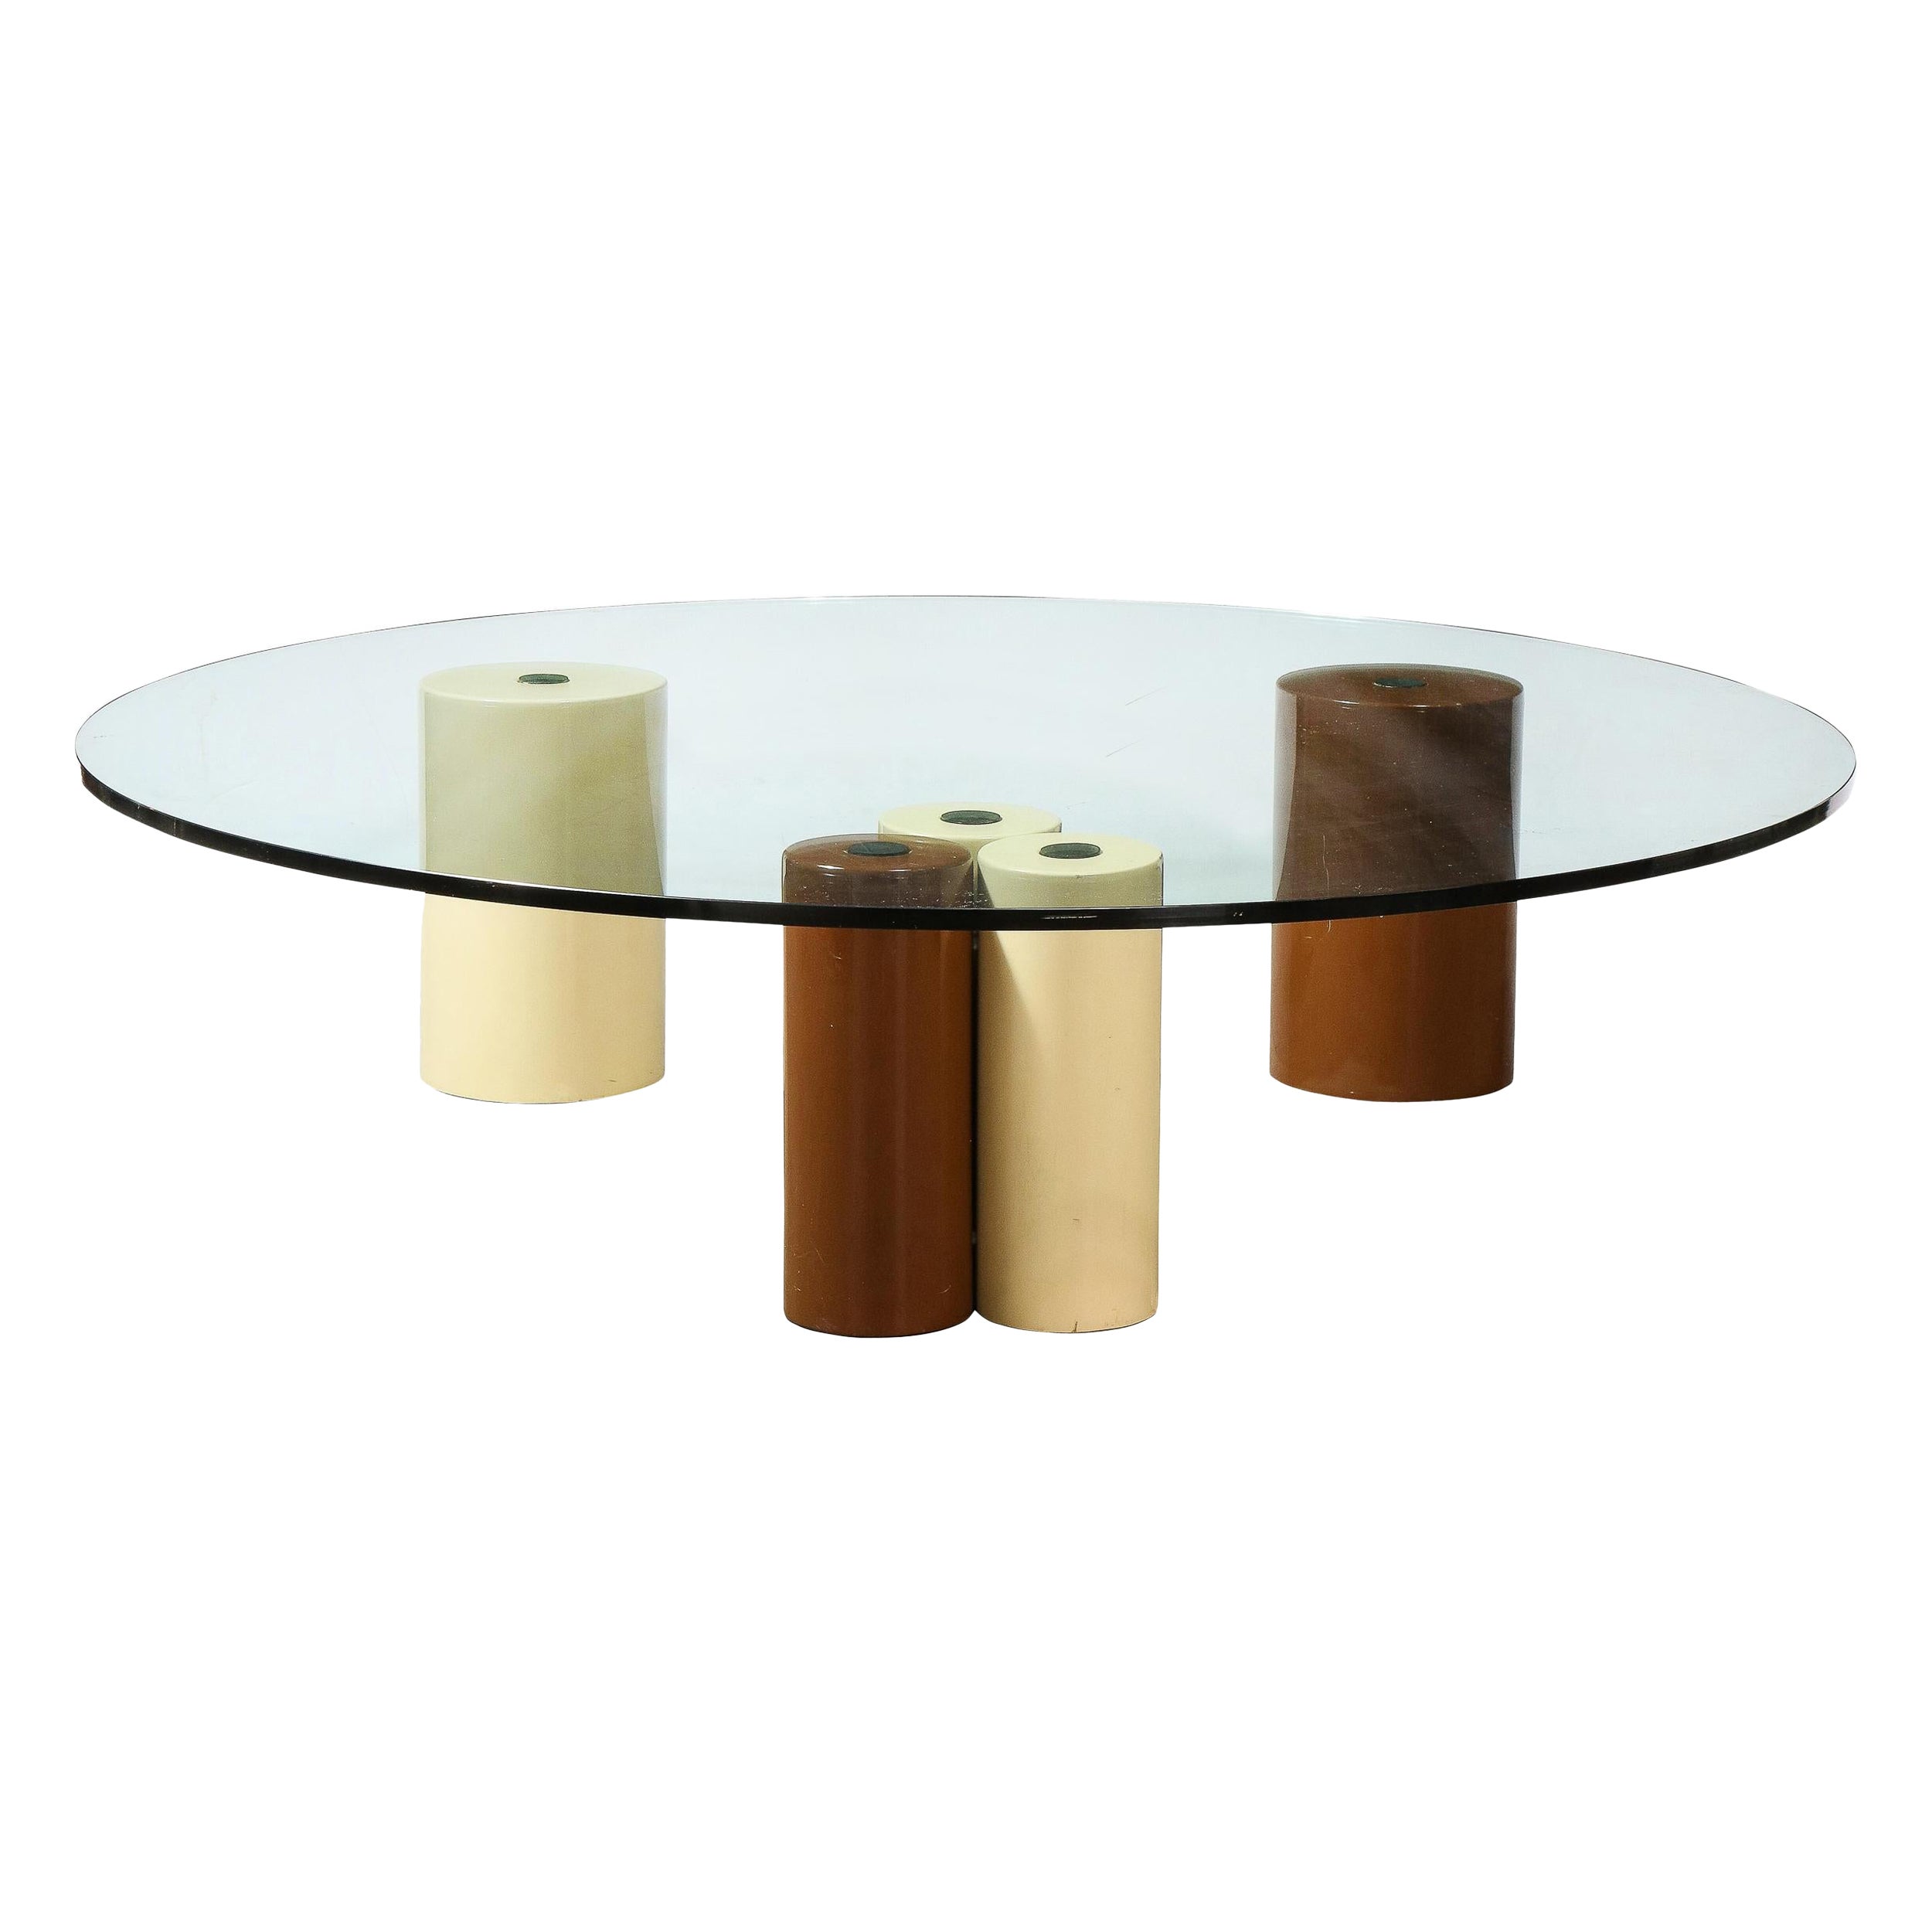 Modernist Cream and Ochre Enamel Pillar Cocktail Table by Saporiti For Sale